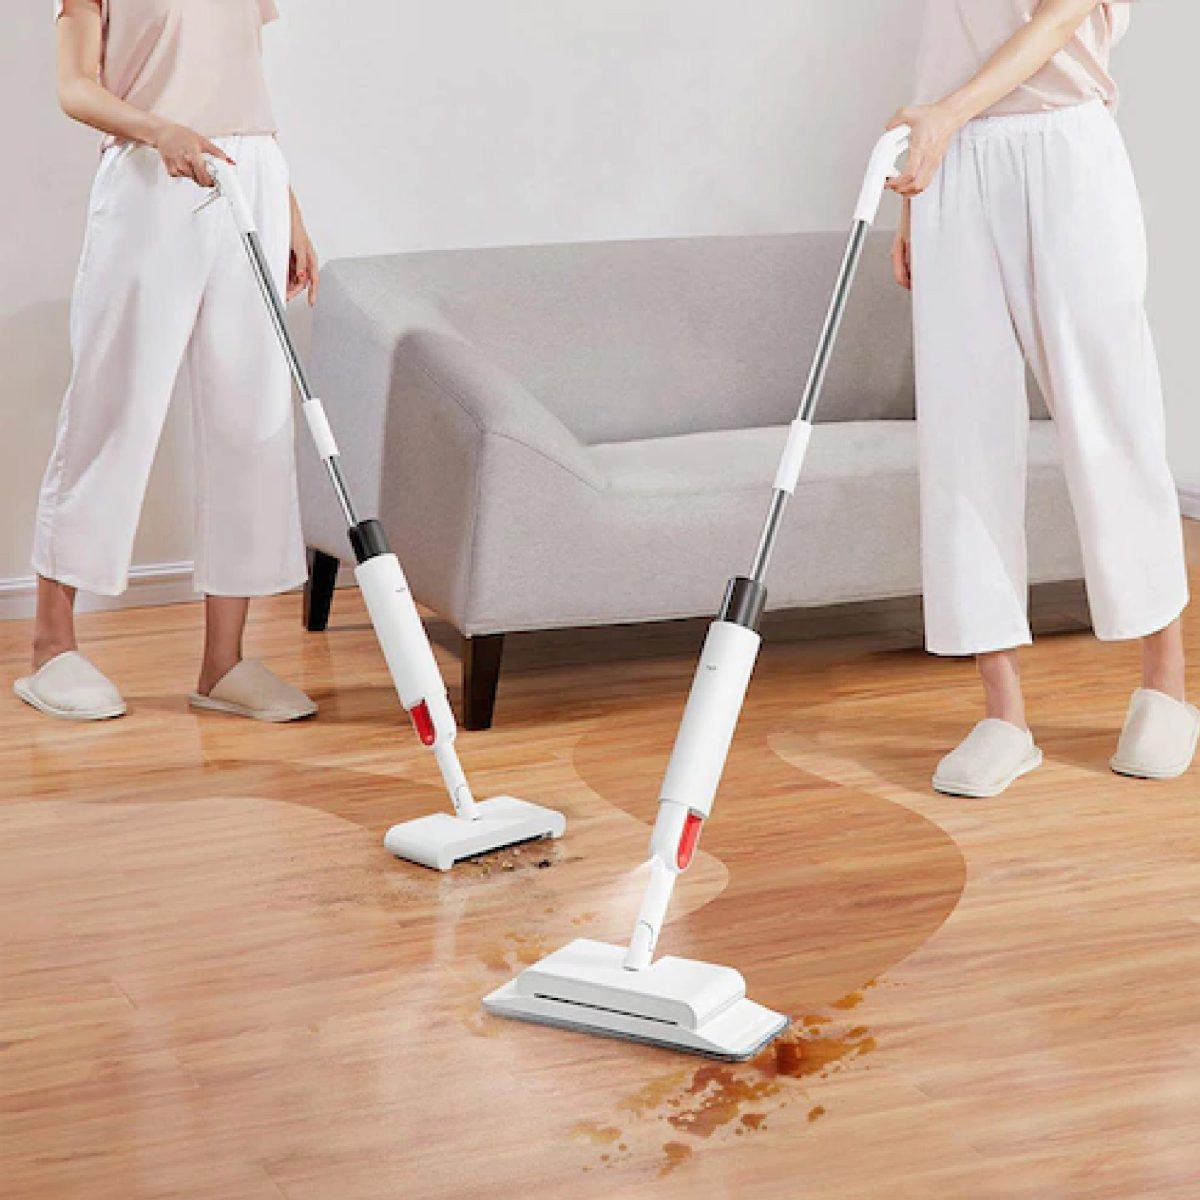 Delmar 04 Xiaomi &Lt;H1&Gt;Deerma Dem-Tb900 Sweep Mop With Sweeping / Cleaning Function&Lt;/H1&Gt; Easy To Operate, Easy To Push, Long-Distance Spray Can Make The Ground Slightly Damp, High Cleaning Efficiency. Front Roller Brush Spiral Machine, I.e. Pushed Forward Rotation Can Drive The Roller Brush, The Floor Dust Rubbish Swept Into The Dust Box, Dust And No Sweep Net. Soft Bristles Slender, Deep Ground Slit Sweep Out Dust, Clean The Inside And Outside. Deerma Dem-Tb900 Sweep Mop With Sweeping / Cleaning Function